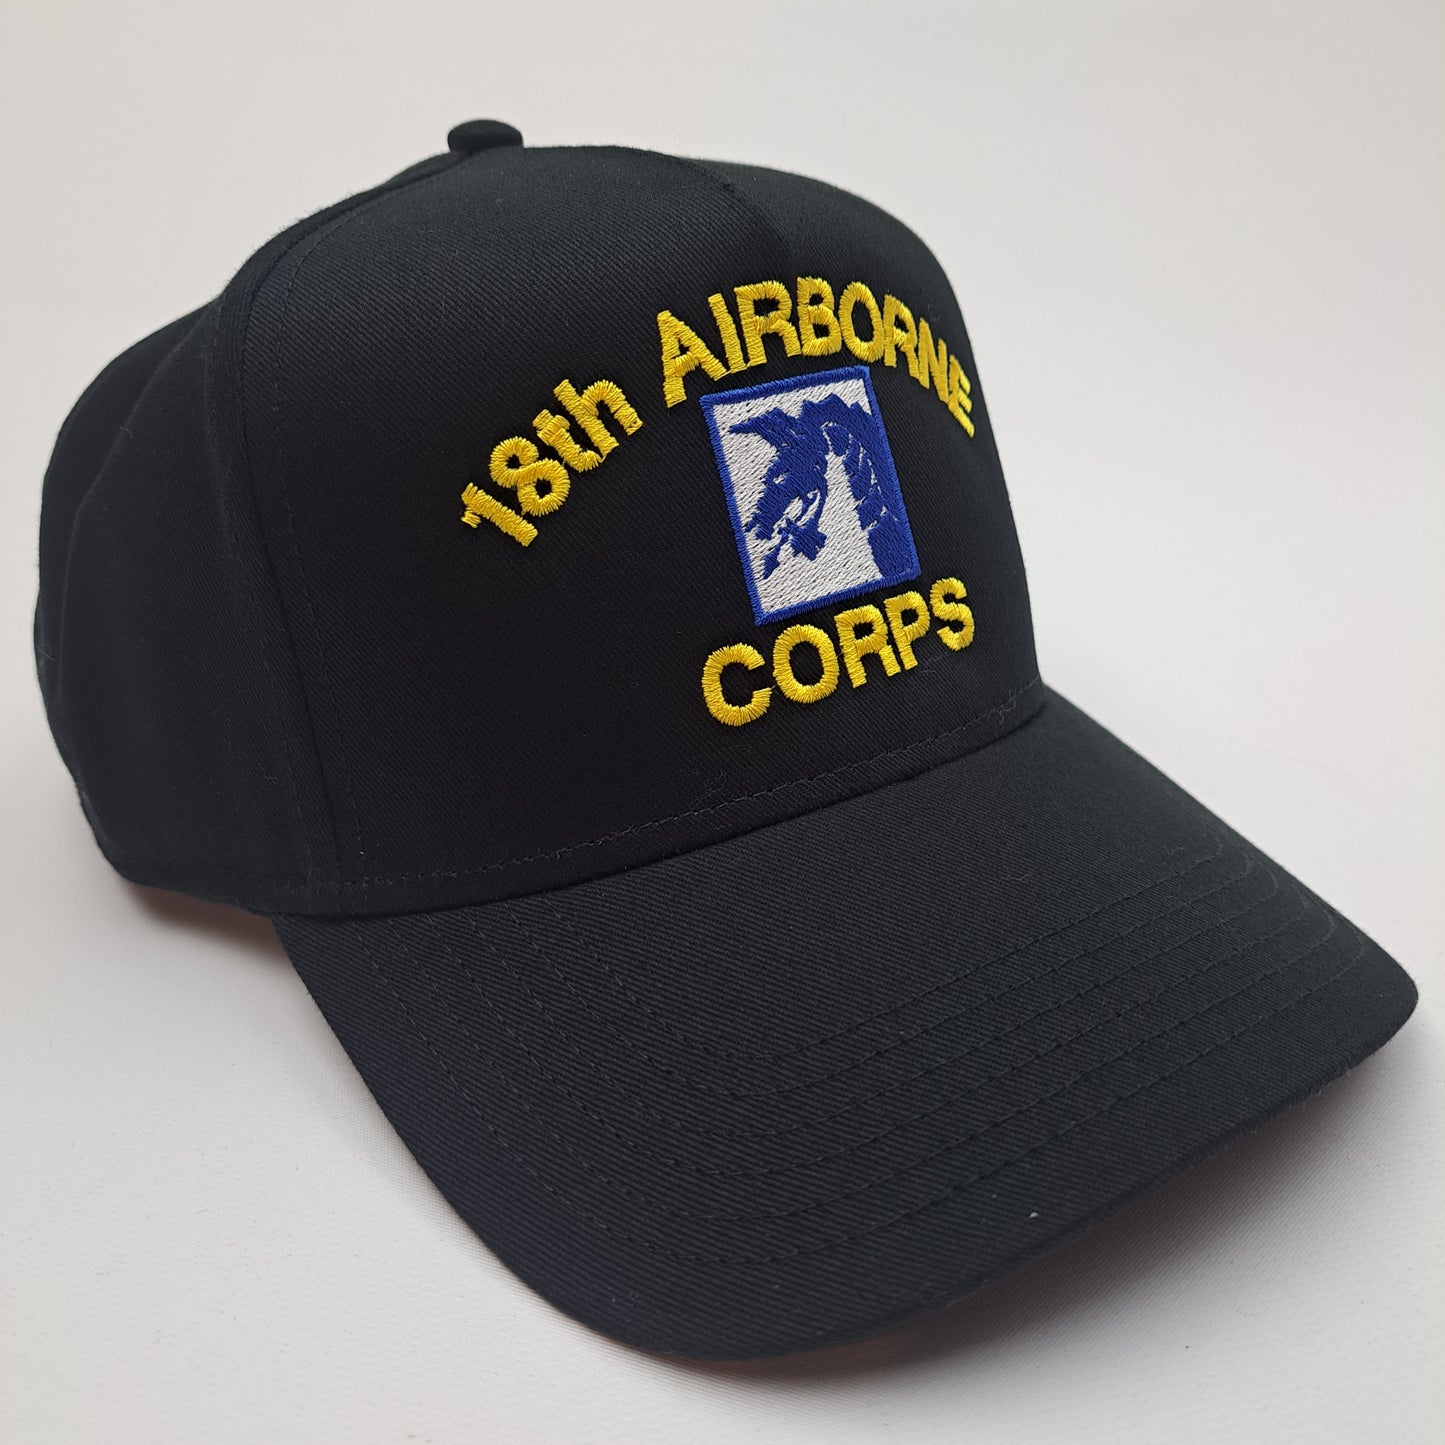 U.S. Army 18th Airborne Men's Ball Cap Hat Black Embroidered